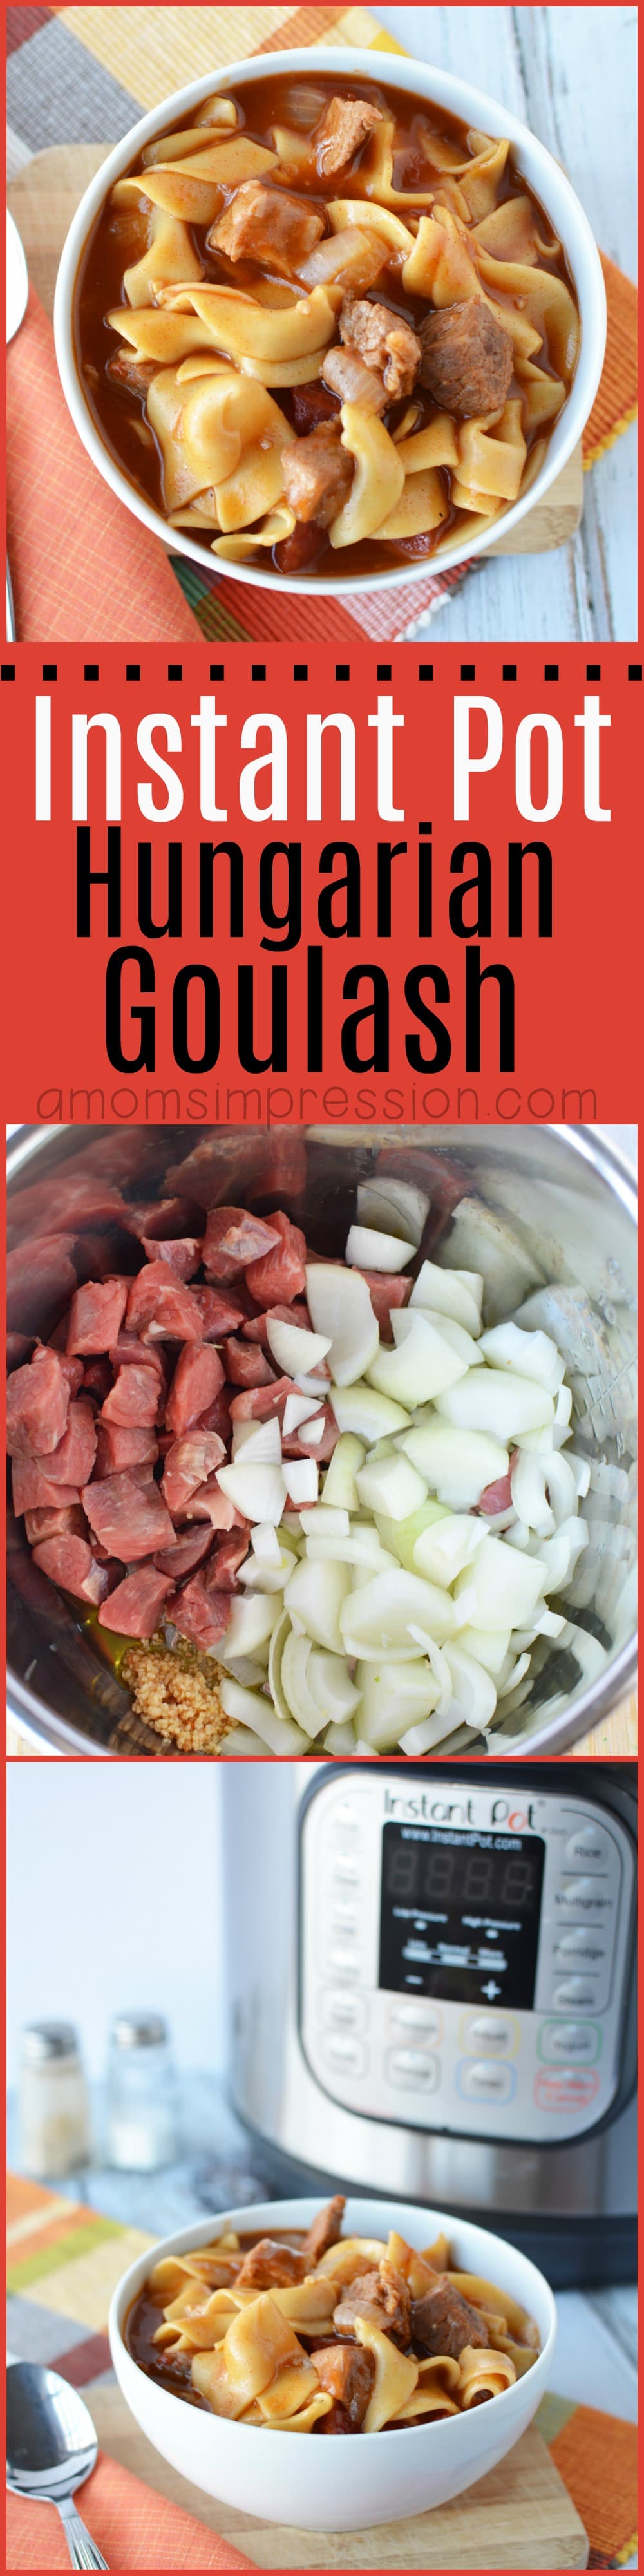 Looking for a budget-friendly, healthy recipe? Check out this traditional Instant Pot Hungarian Goulash recipe. It is simple and easy to make in minutes using your pressure cooker. #InstantPot #HungarianGoulash #Goulash